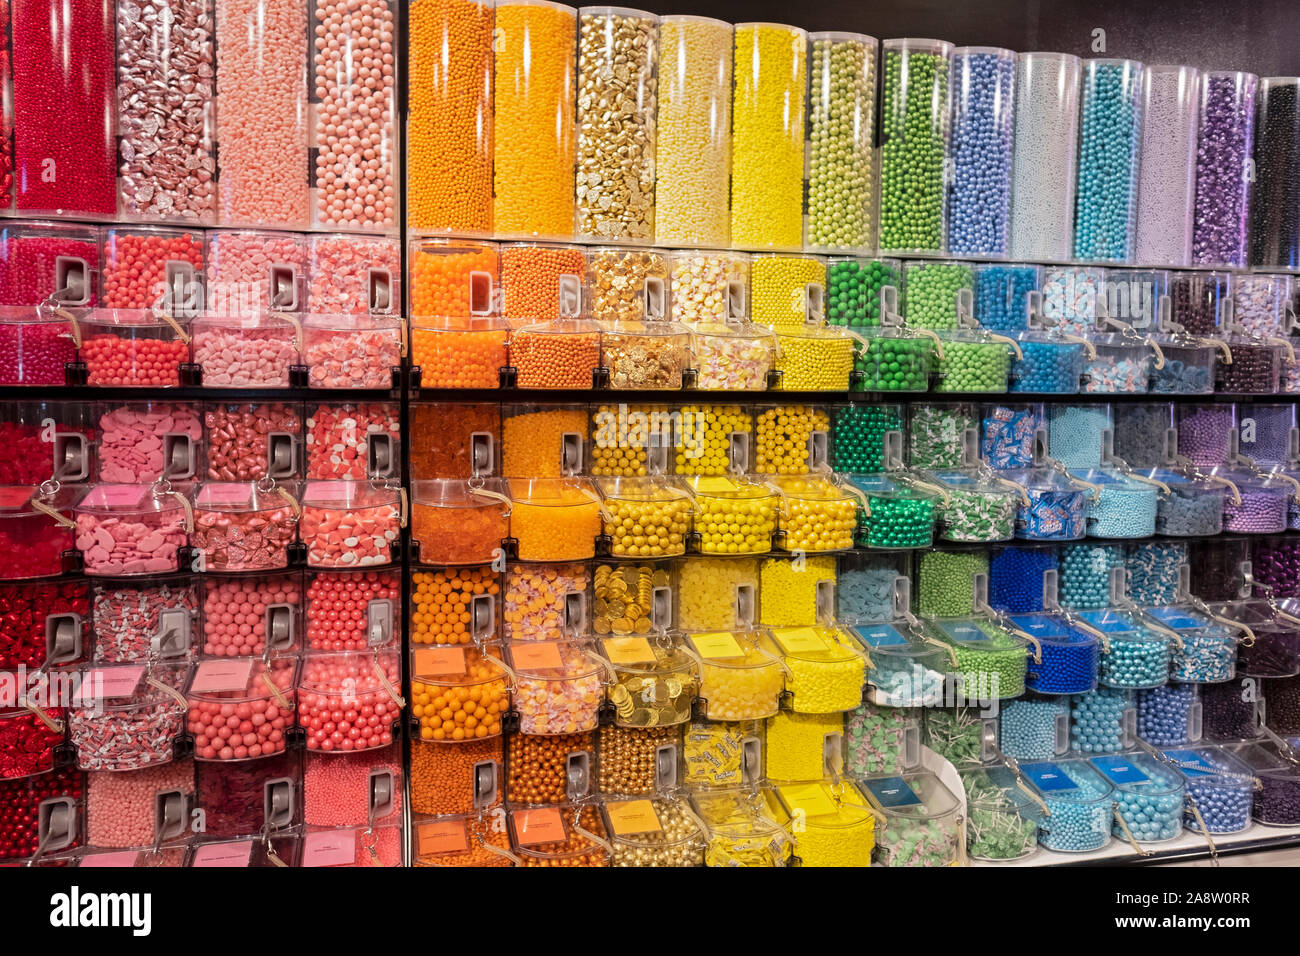 A colorful display of candy dispensers at Dylan's Candy Bar, a boutique candy shop on Union Square West in downtown Manhattan, New York City. Stock Photo